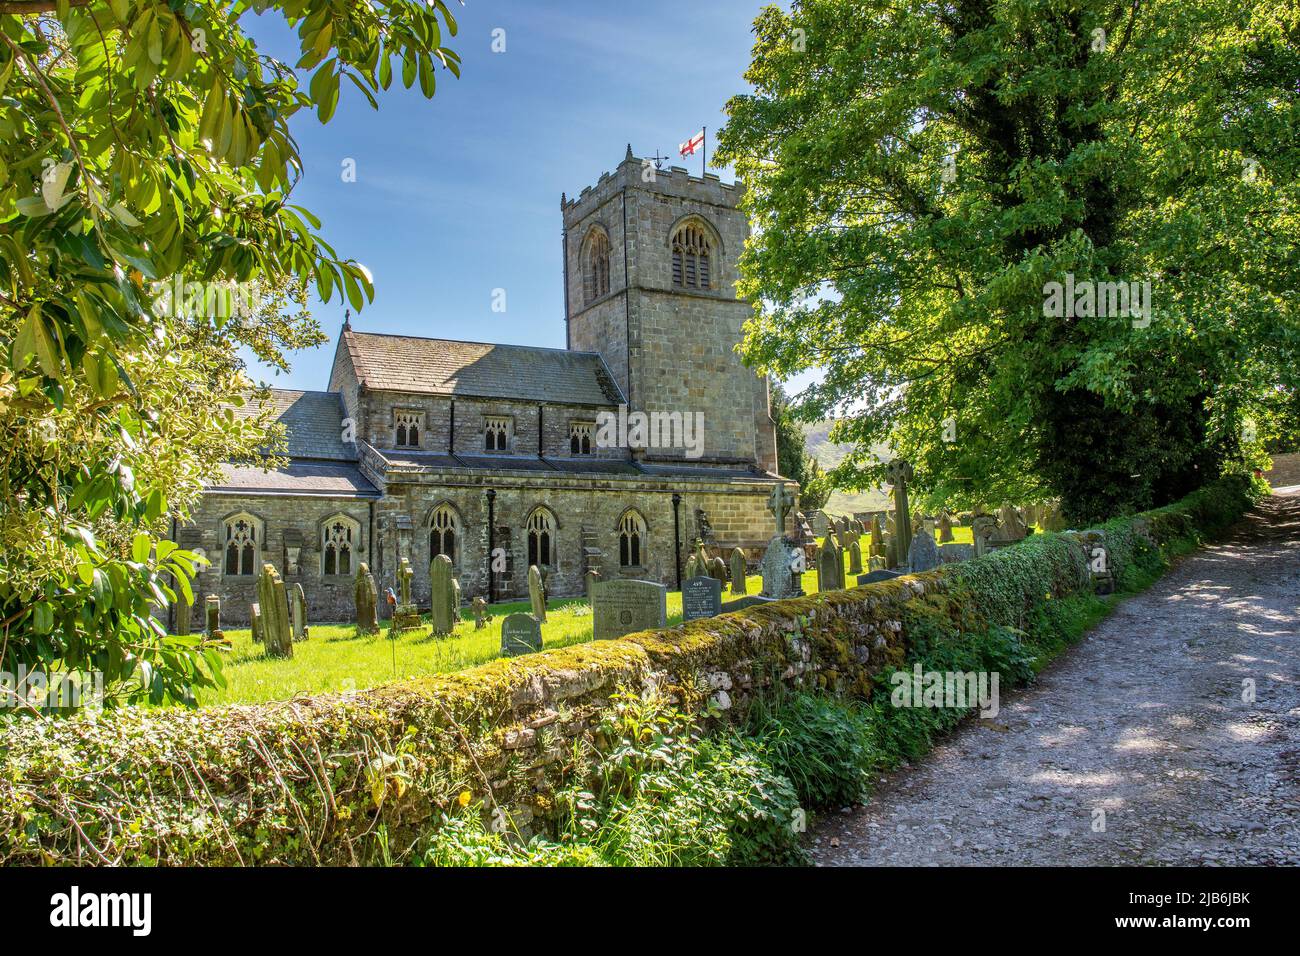 Parish Curch of St. Wifred Burnsall in the Craven district of North Yorkshire, England. It is situated on the River Wharfe in Wharfedale, and is in th Stock Photo